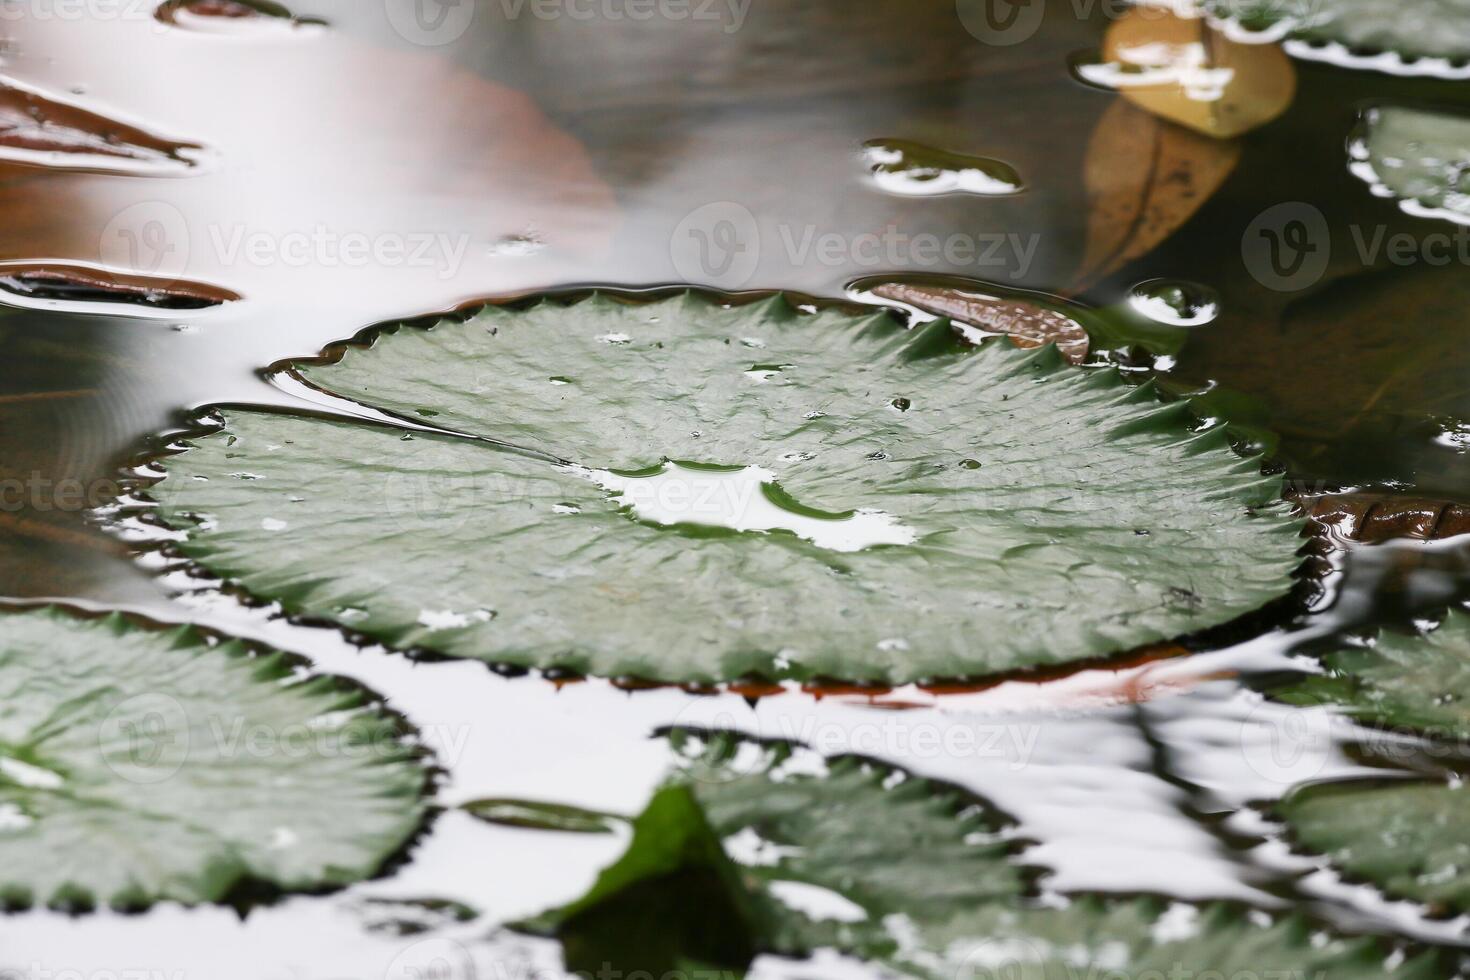 Amazon Rain Forest Water Lilly. Lotus Leaves floatomg on water photo